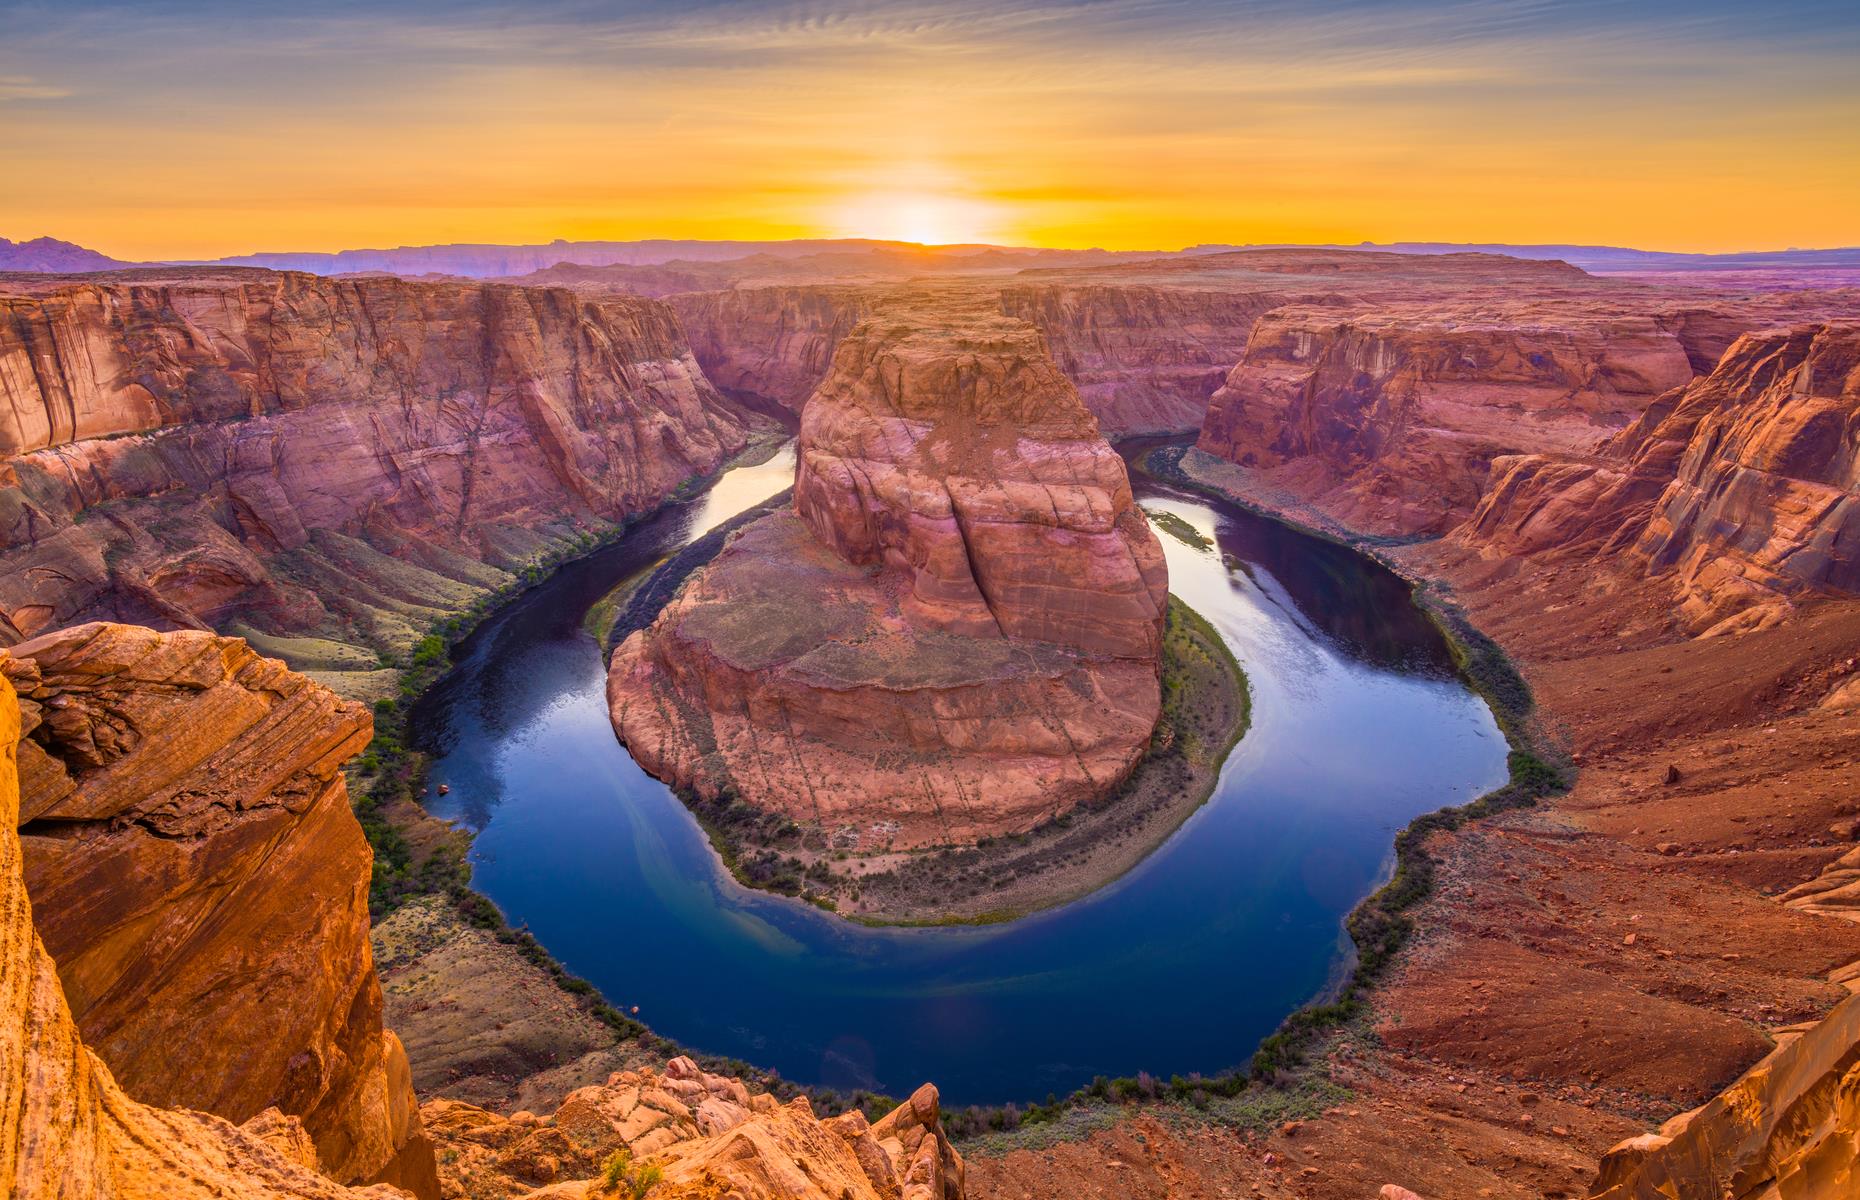 <p>Just outside Grand Canyon National Park, this horseshoe-shaped meander of the Colorado River is easily accessed via the town of Page. Head to the <a href="https://www.visitarizona.com/uniquely-az/parks-and-monuments/horseshoe-bend">Horseshoe Bend Overloo</a><a href="https://www.visitarizona.com/uniquely-az/parks-and-monuments/horseshoe-bend">k</a> before sunset to watch the ancient rocks glow peach, pink and soft lilac, mirrored in the water.</p>  <p><a href="http://bit.ly/3roL4wv"><strong>Love this? Follow our Facebook page for more travel inspiration</strong></a></p>